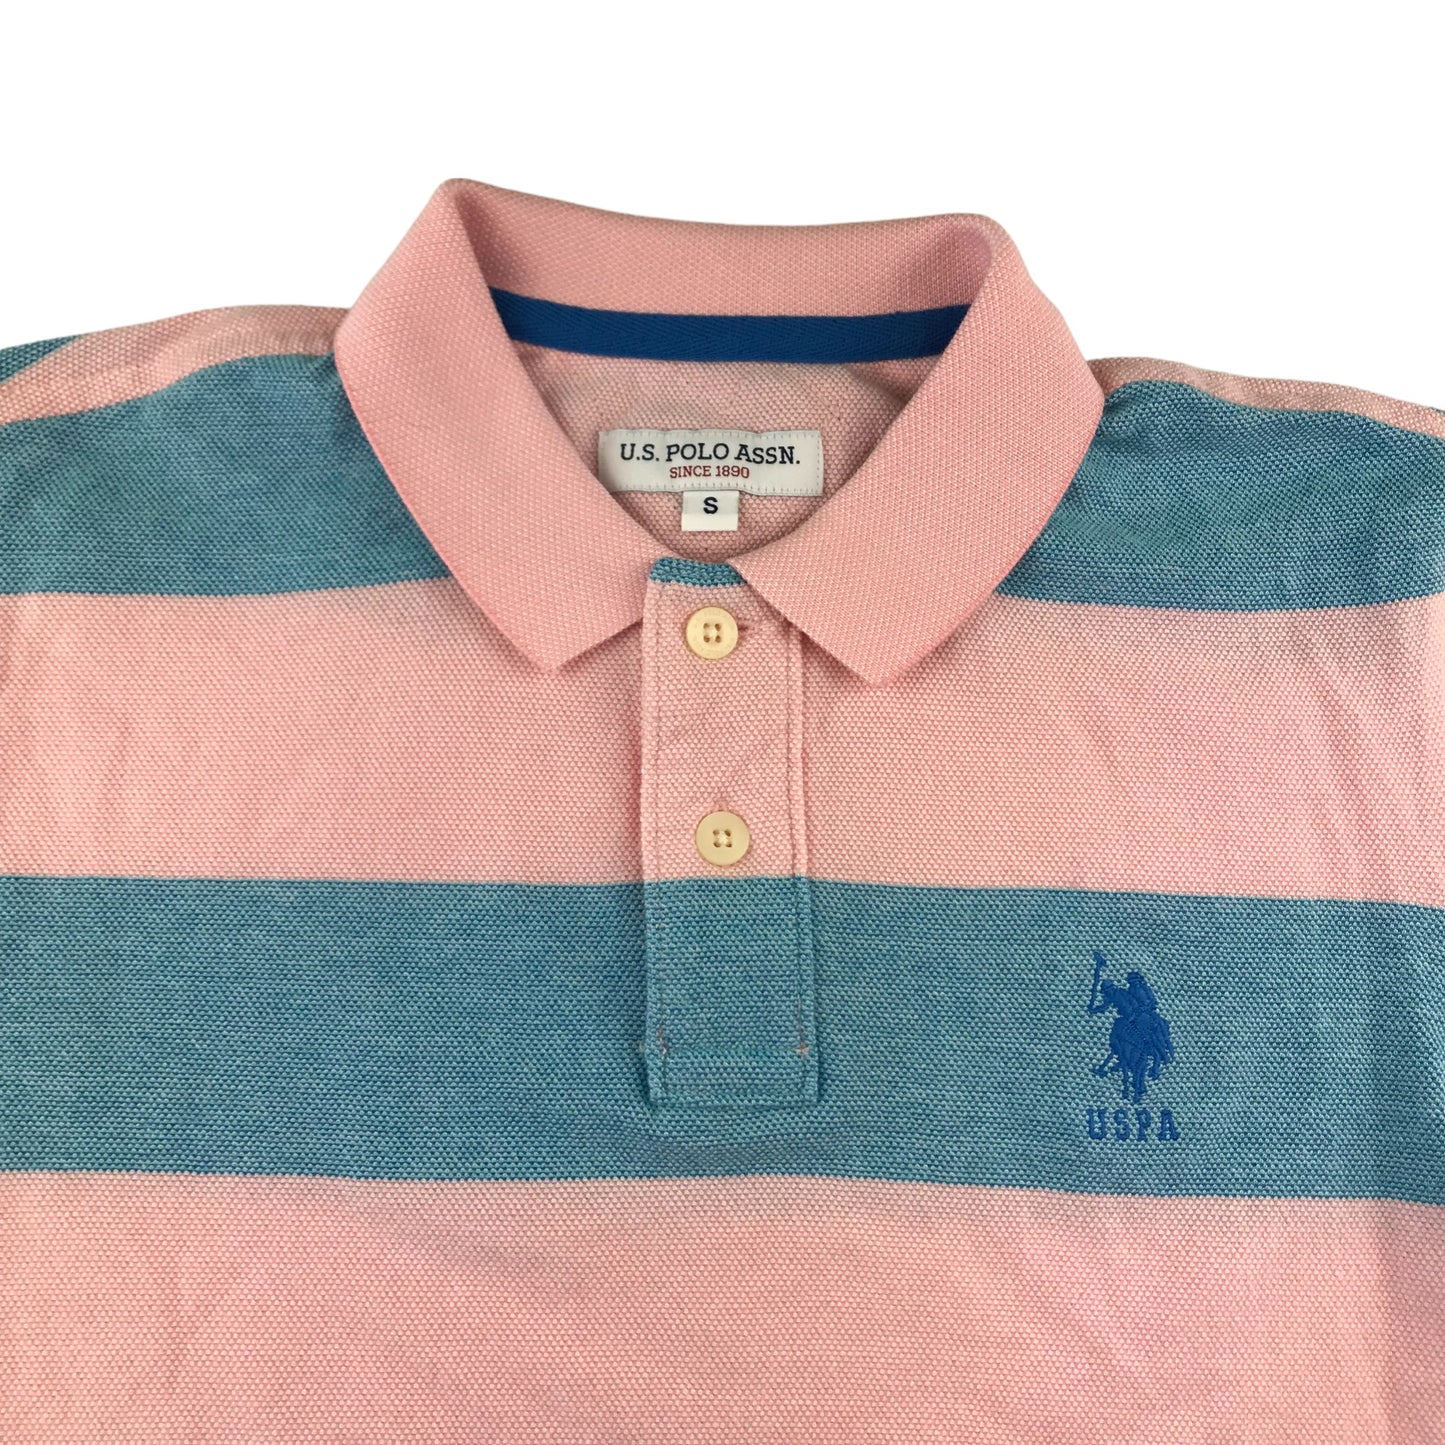 US Polo Assn Polo Shirt Size S Pink and Blue Stripy Short Sleeve Cotton